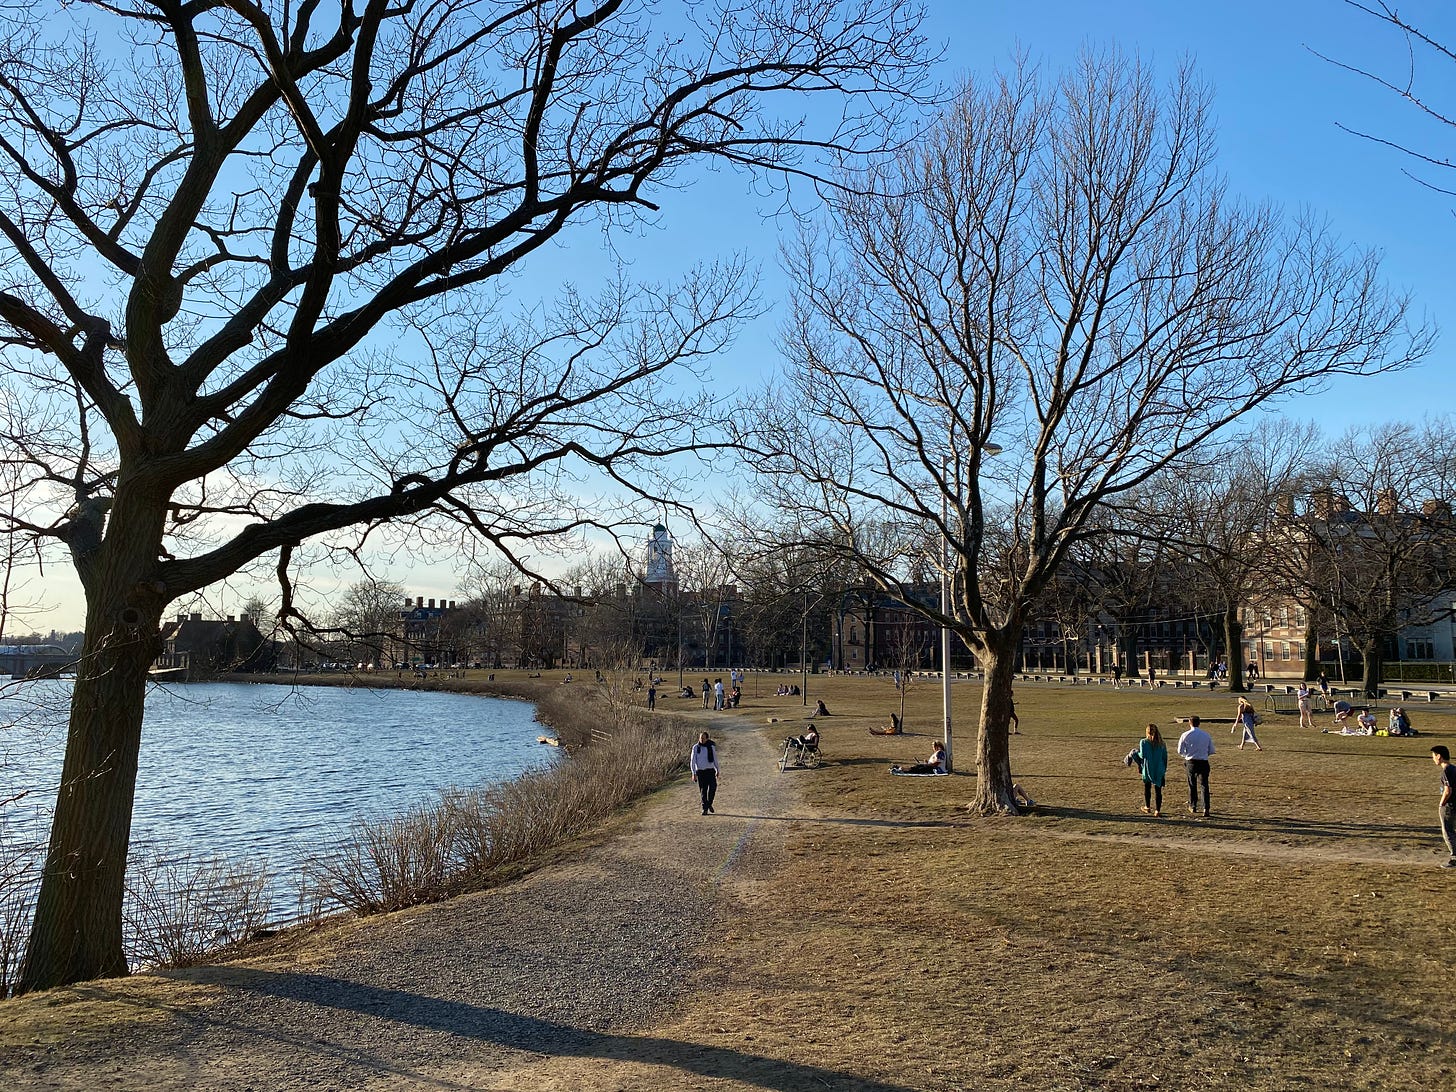 On the left side is a river, and on the right side is a grassy field with some buildings in the distance. This is the Charles River in Boston.